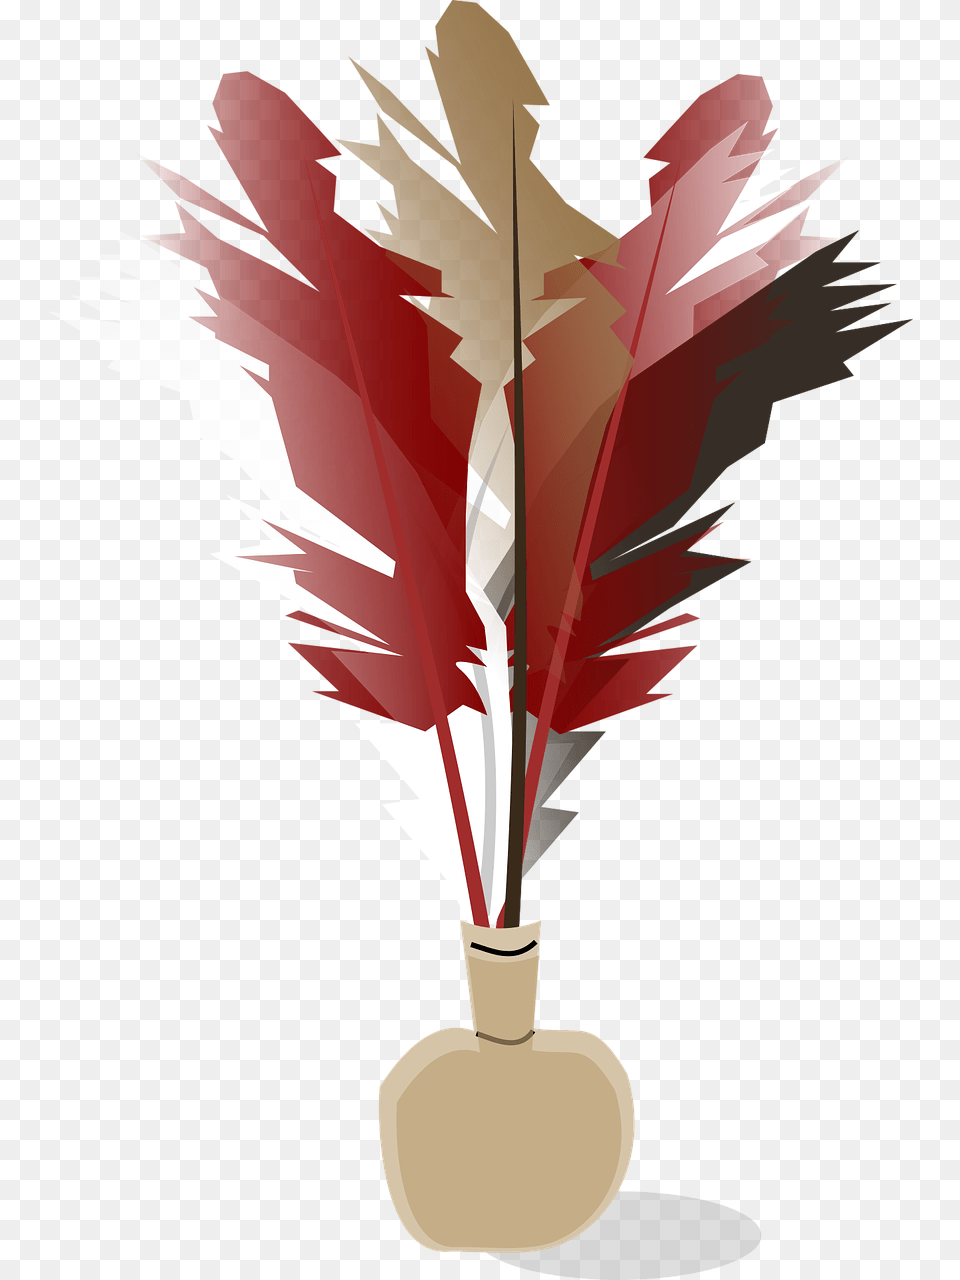 Red Feather Peteca, Bottle, Ink Bottle Free Transparent Png